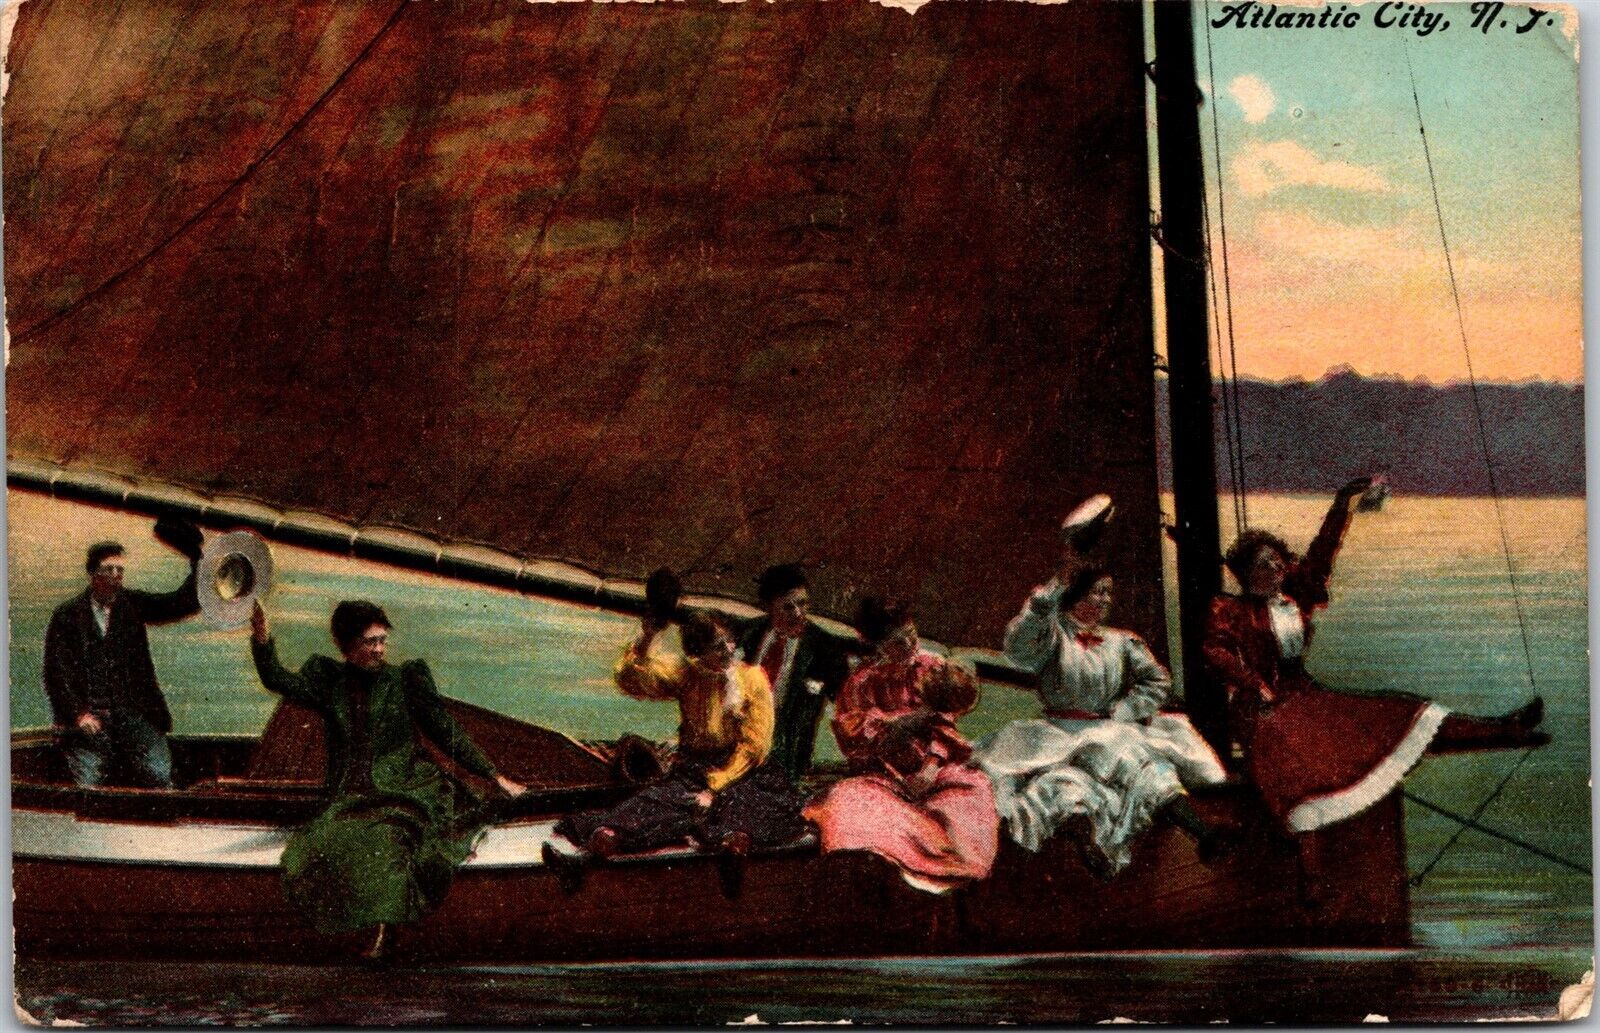 NJ Atlantic City, People on Sailboat, Early 1900s Fashion, DB Posted 1910